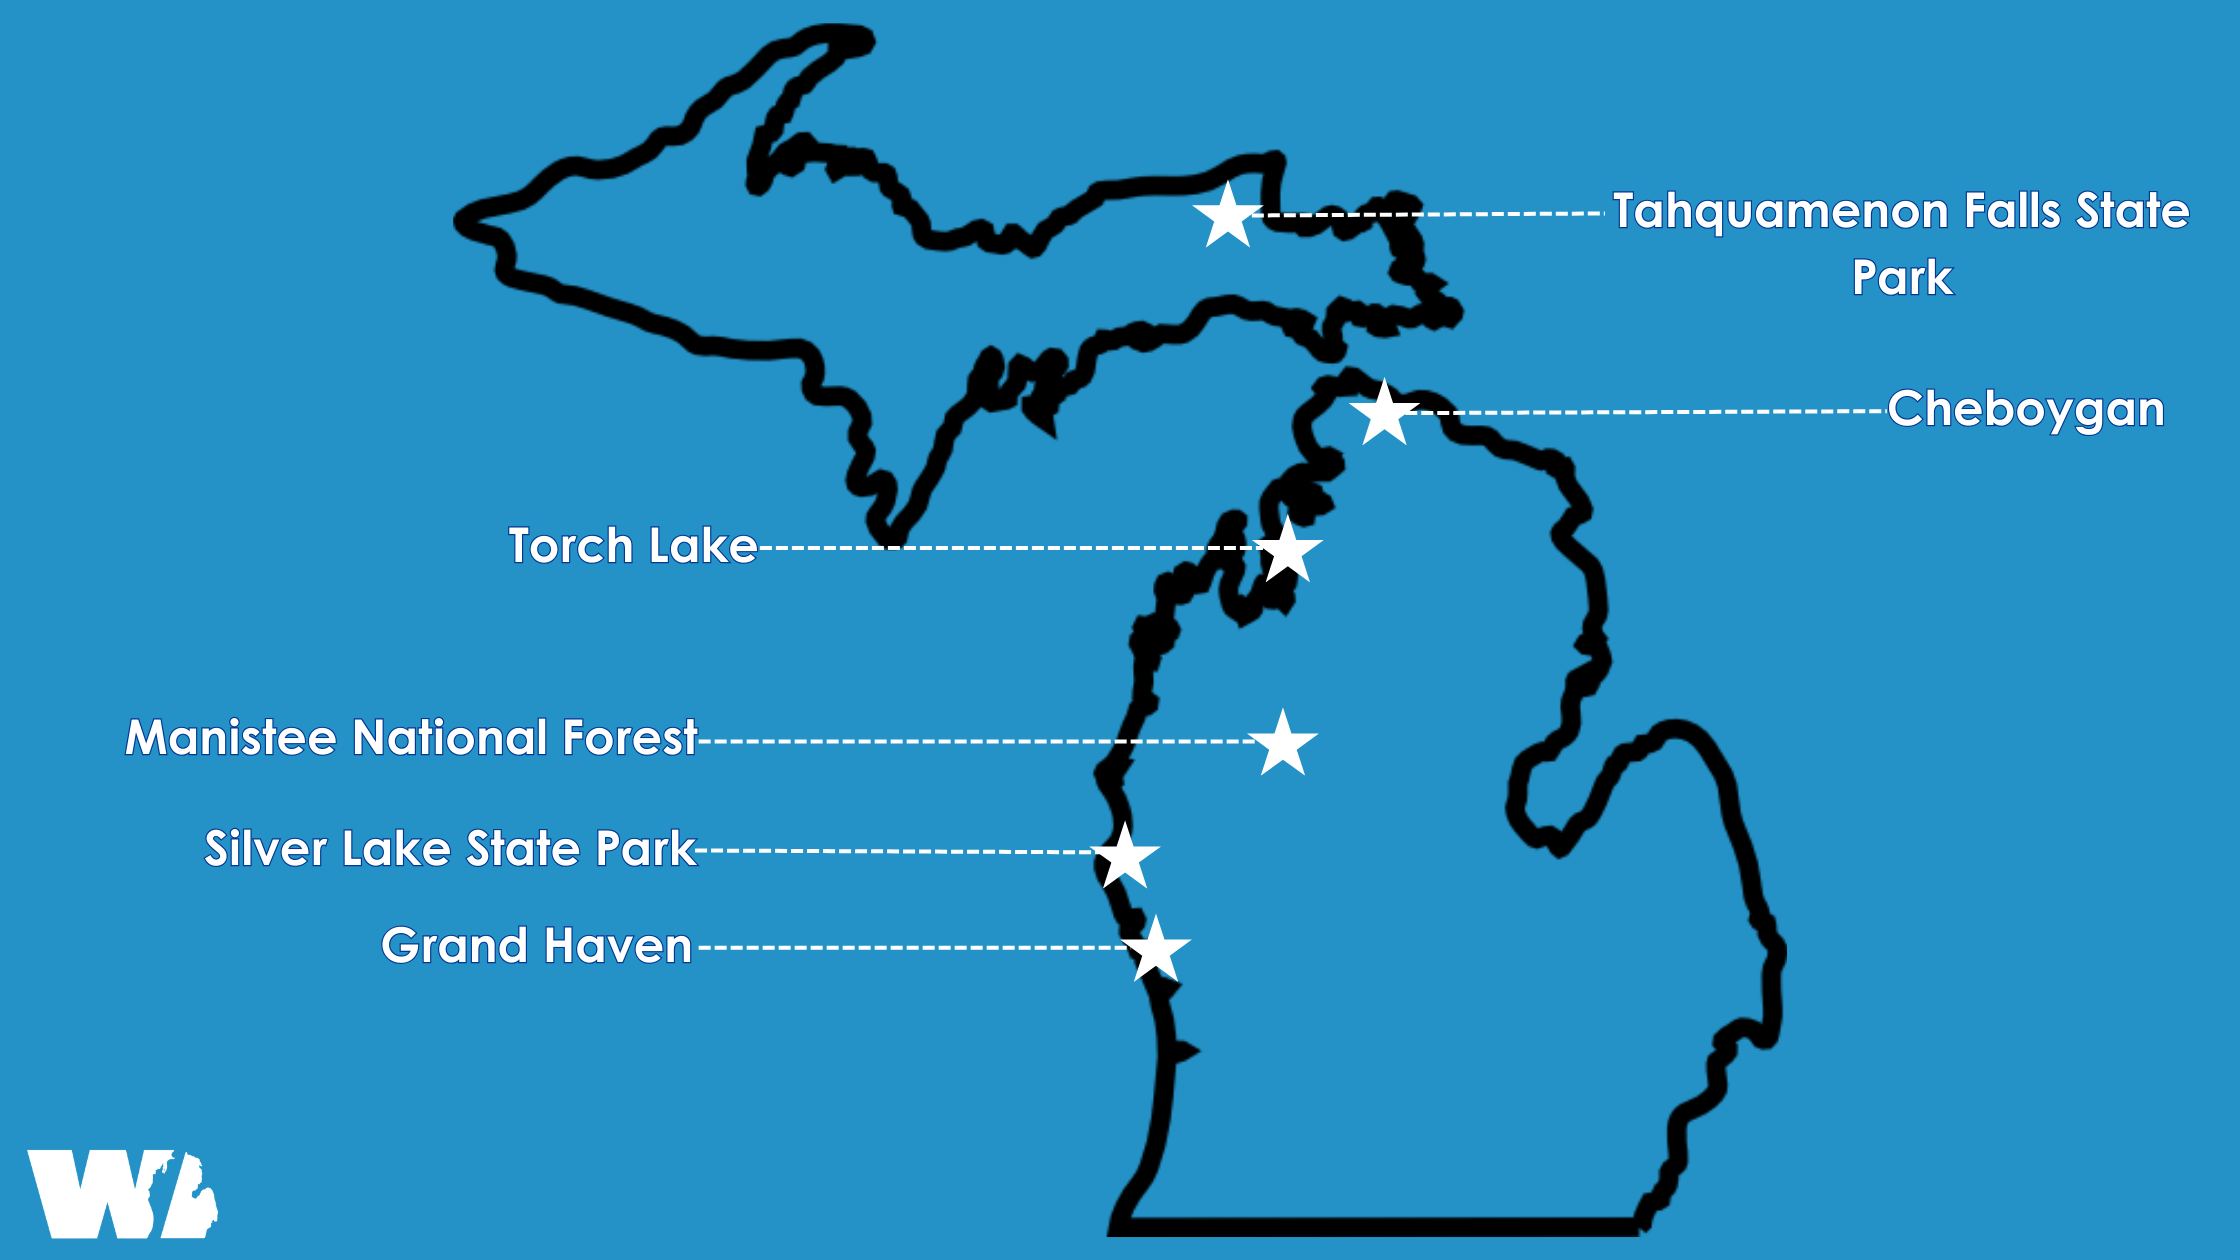 Blue infographic of all six Michigan travel destinations marked on the Michigan map